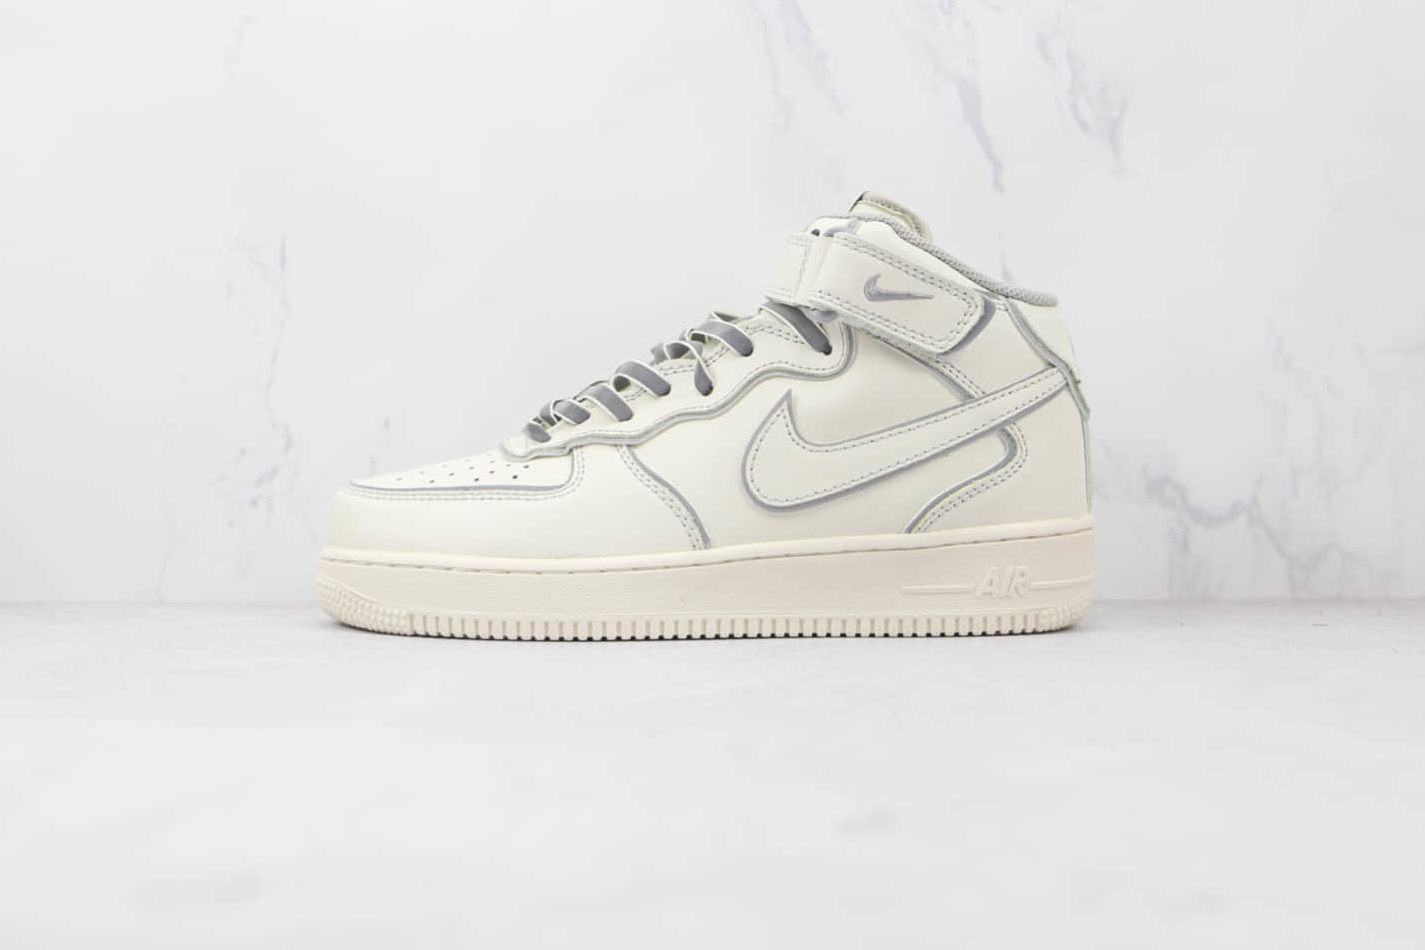 Nike Air Force 1 07 Mid Daredevil Beige Grey White AQ1218-118 - Shop the Iconic Sneakers